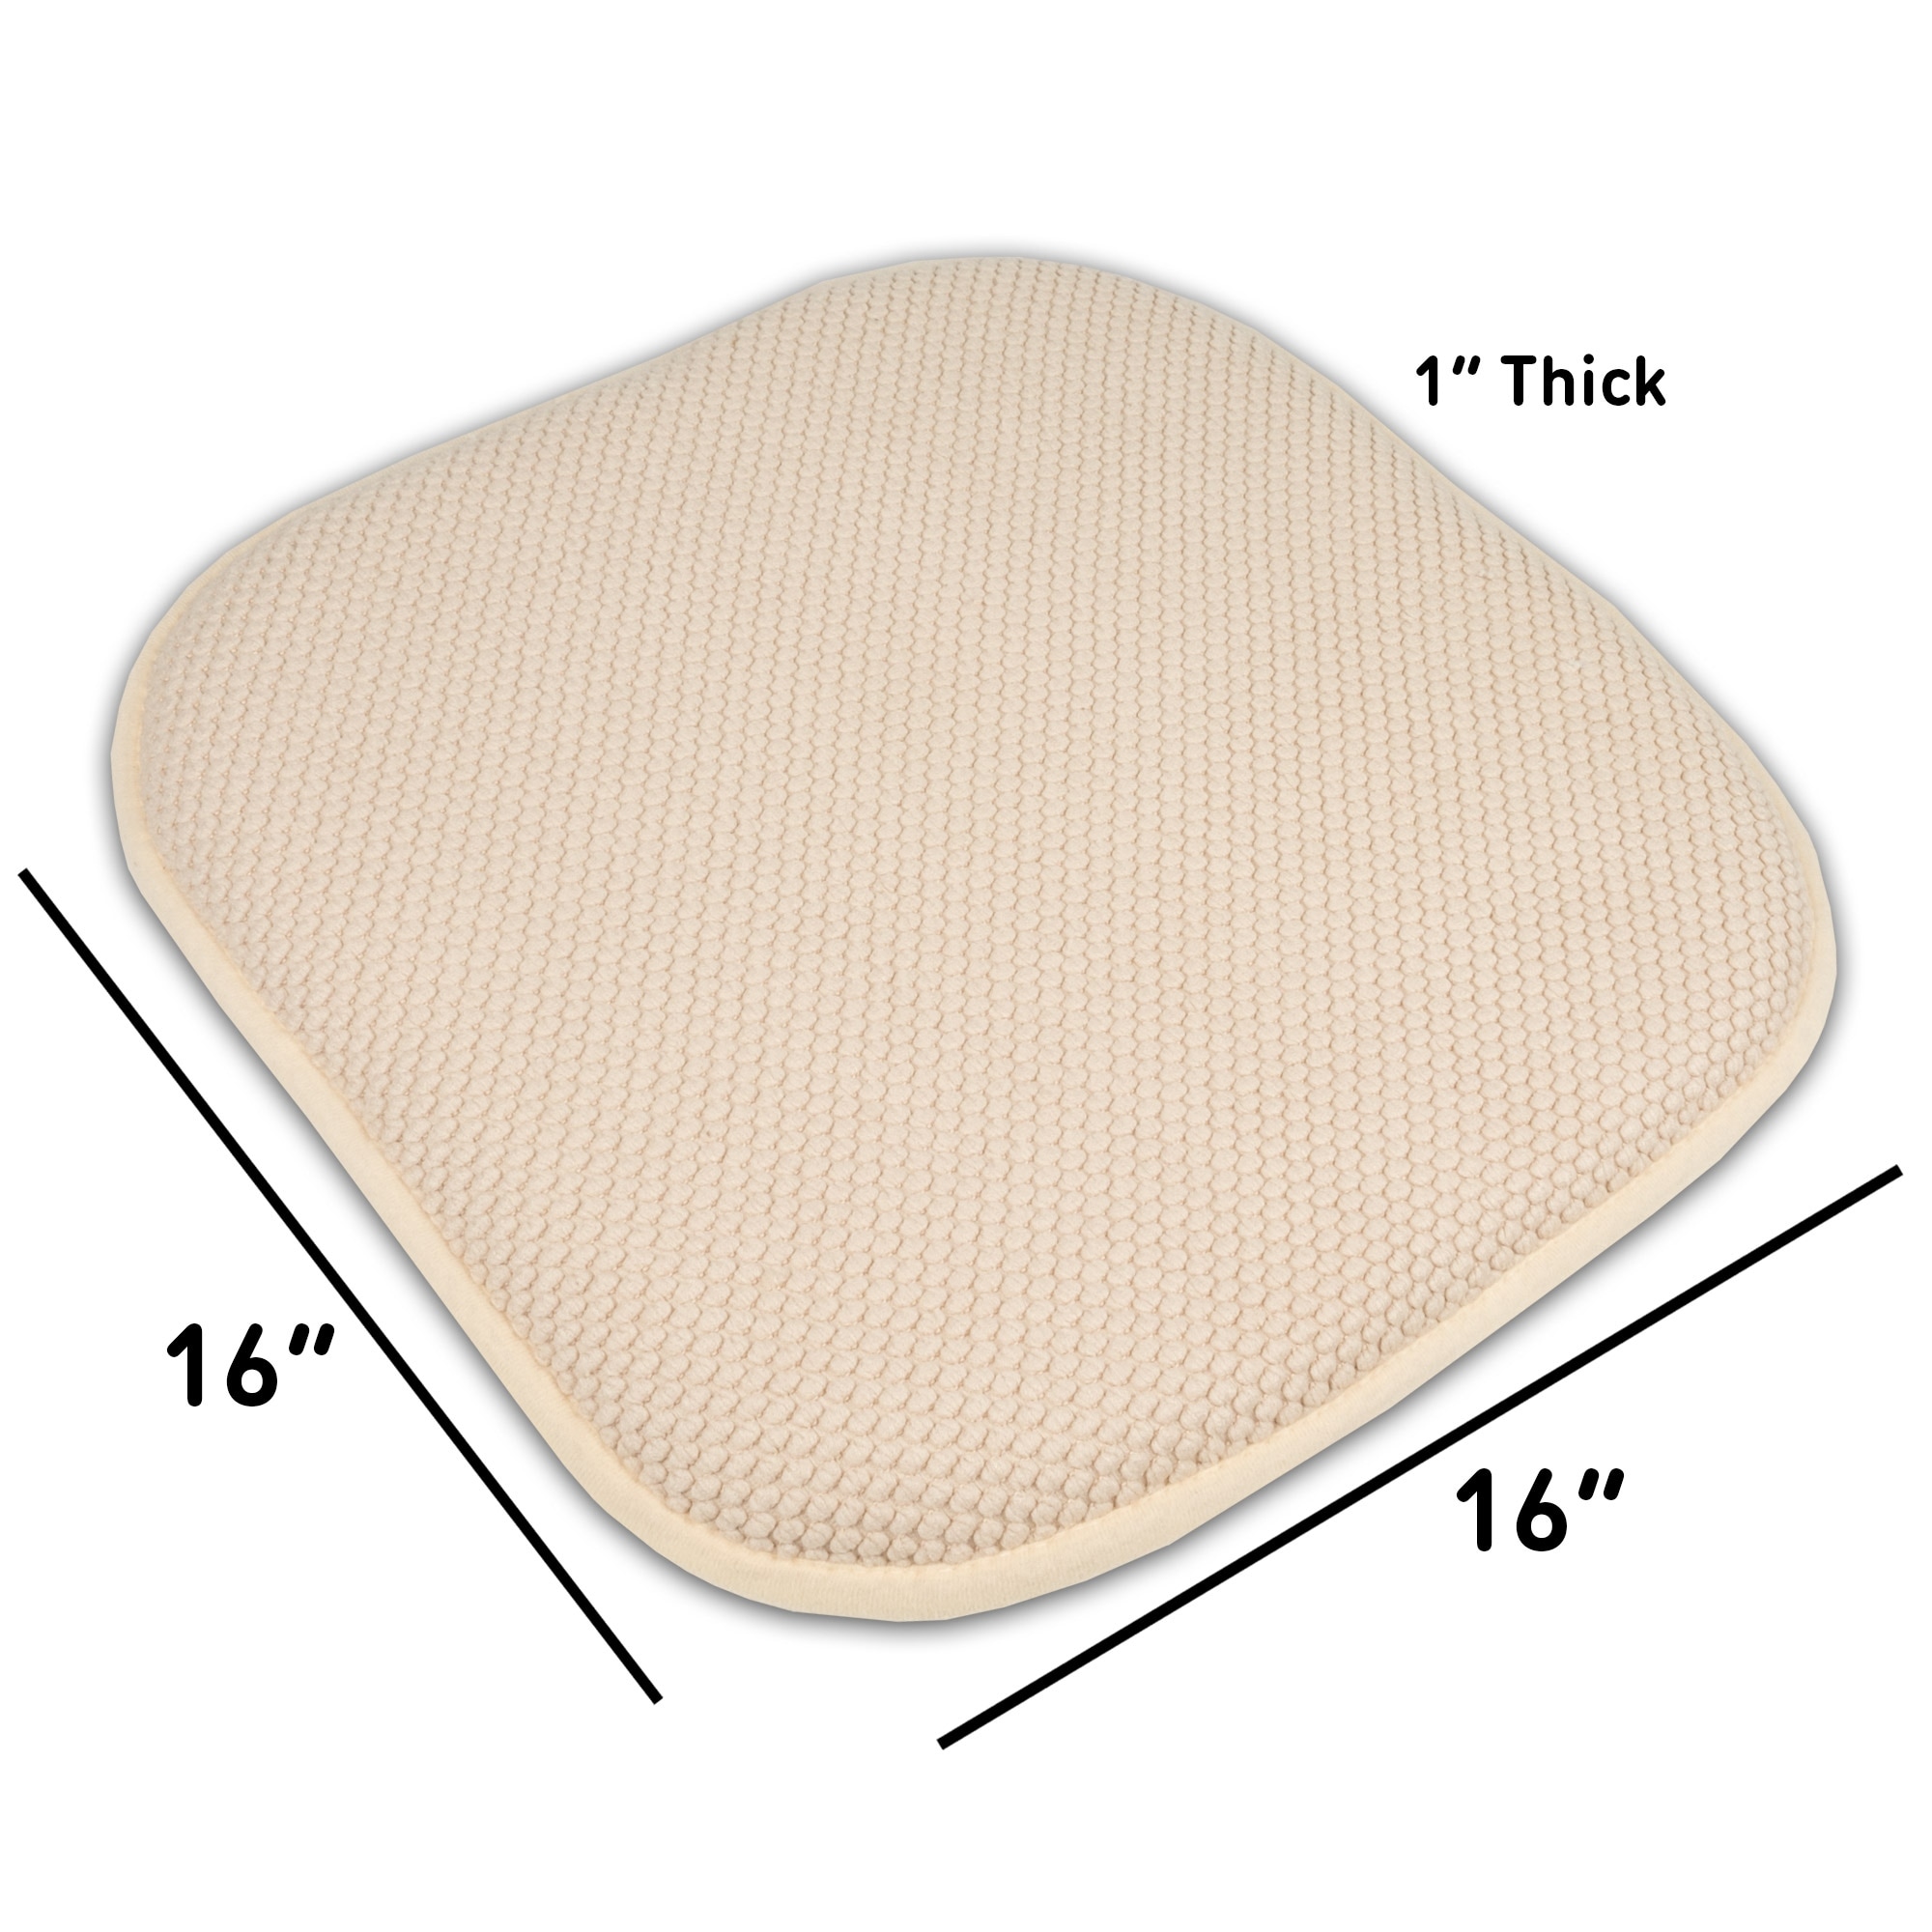  Pink Upholstery Foam Seat Pad Replacement Memory Foams